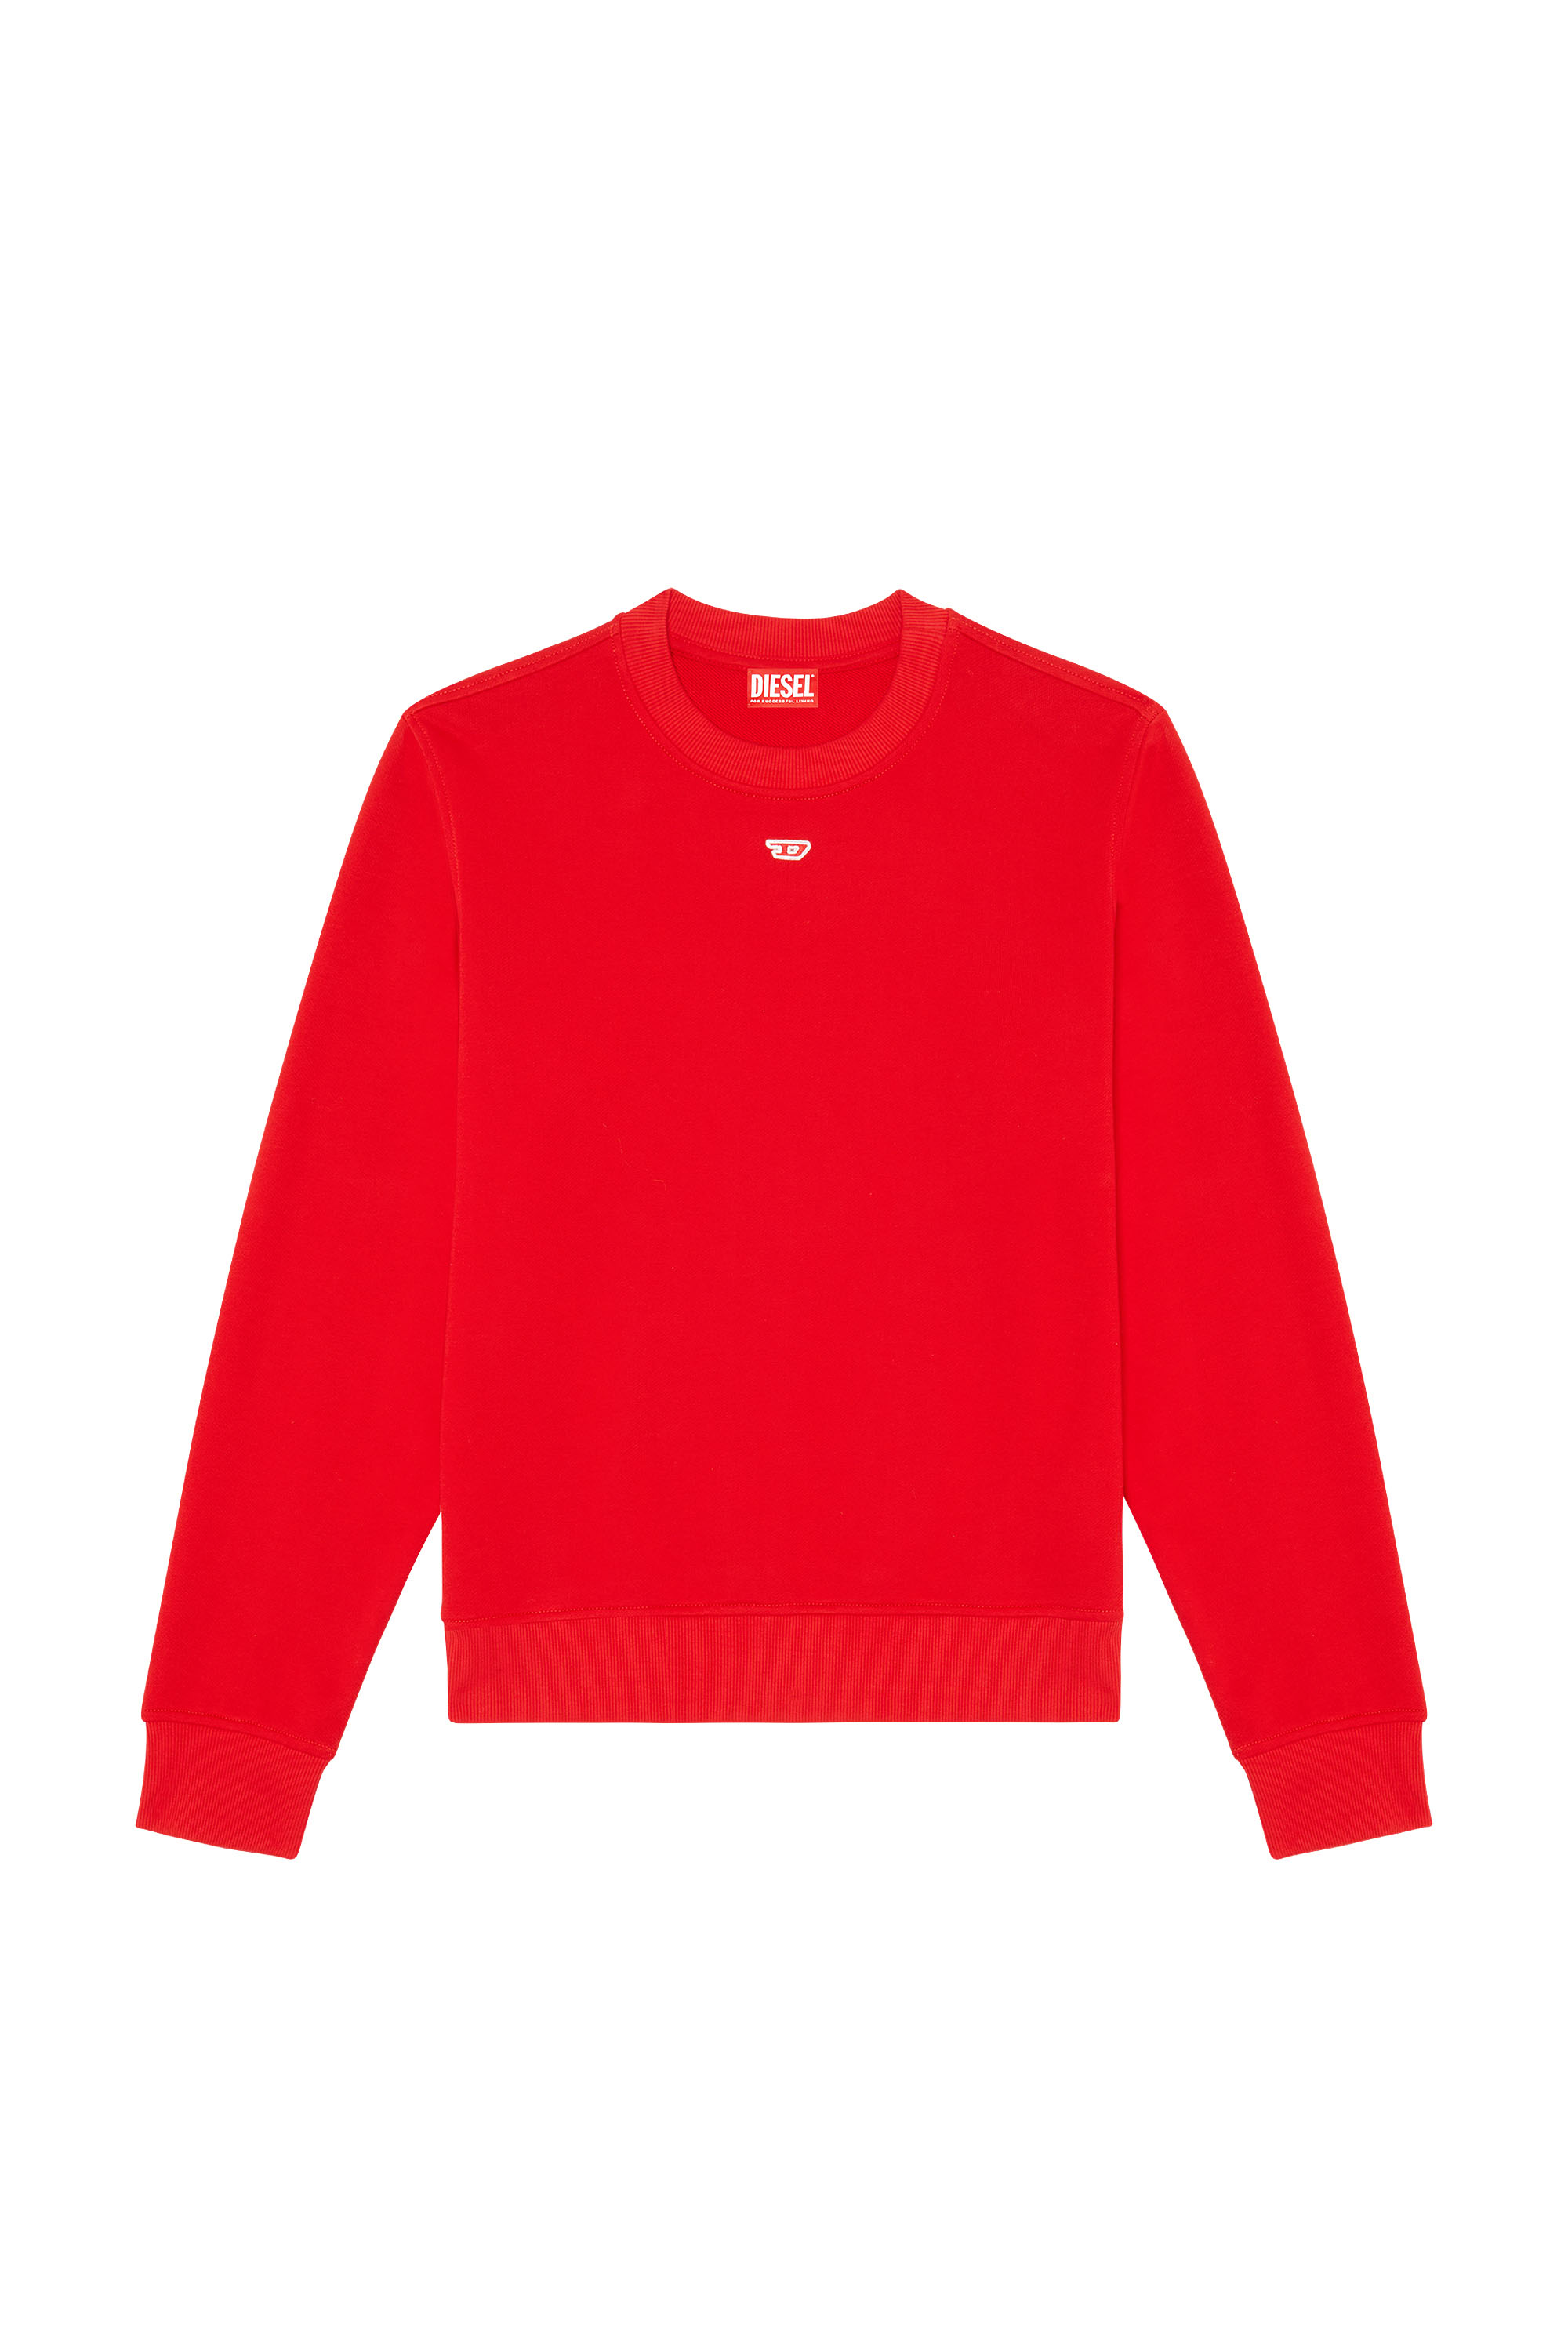 Diesel - S-GINN-D, Unisex Sweatshirt with mini D patch in Red - Image 8